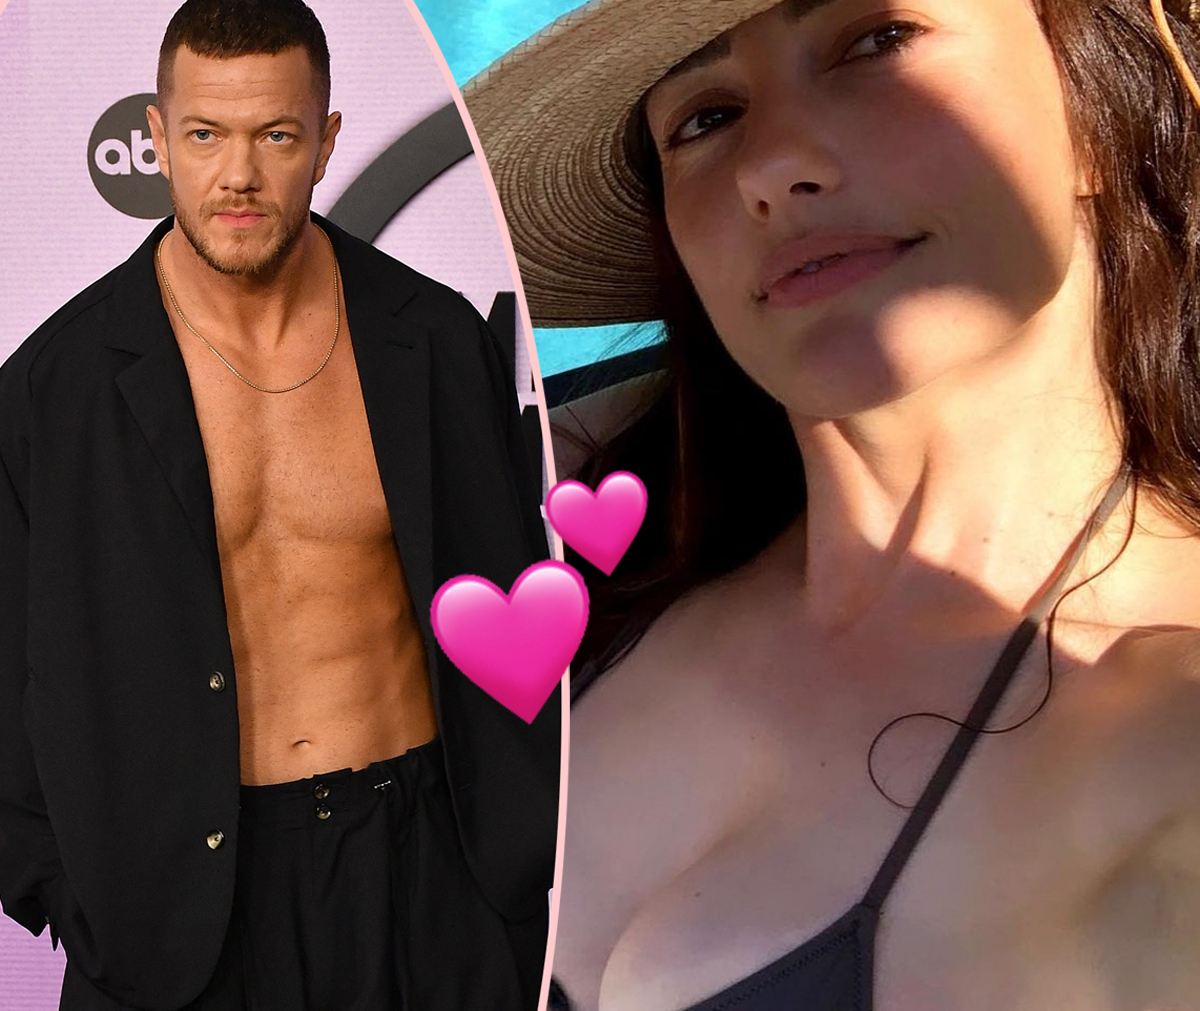 #New Couple Alert?! Minka Kelly Spotted Out On Romantic Date With Imagine Dragons Frontman Dan Reynolds!